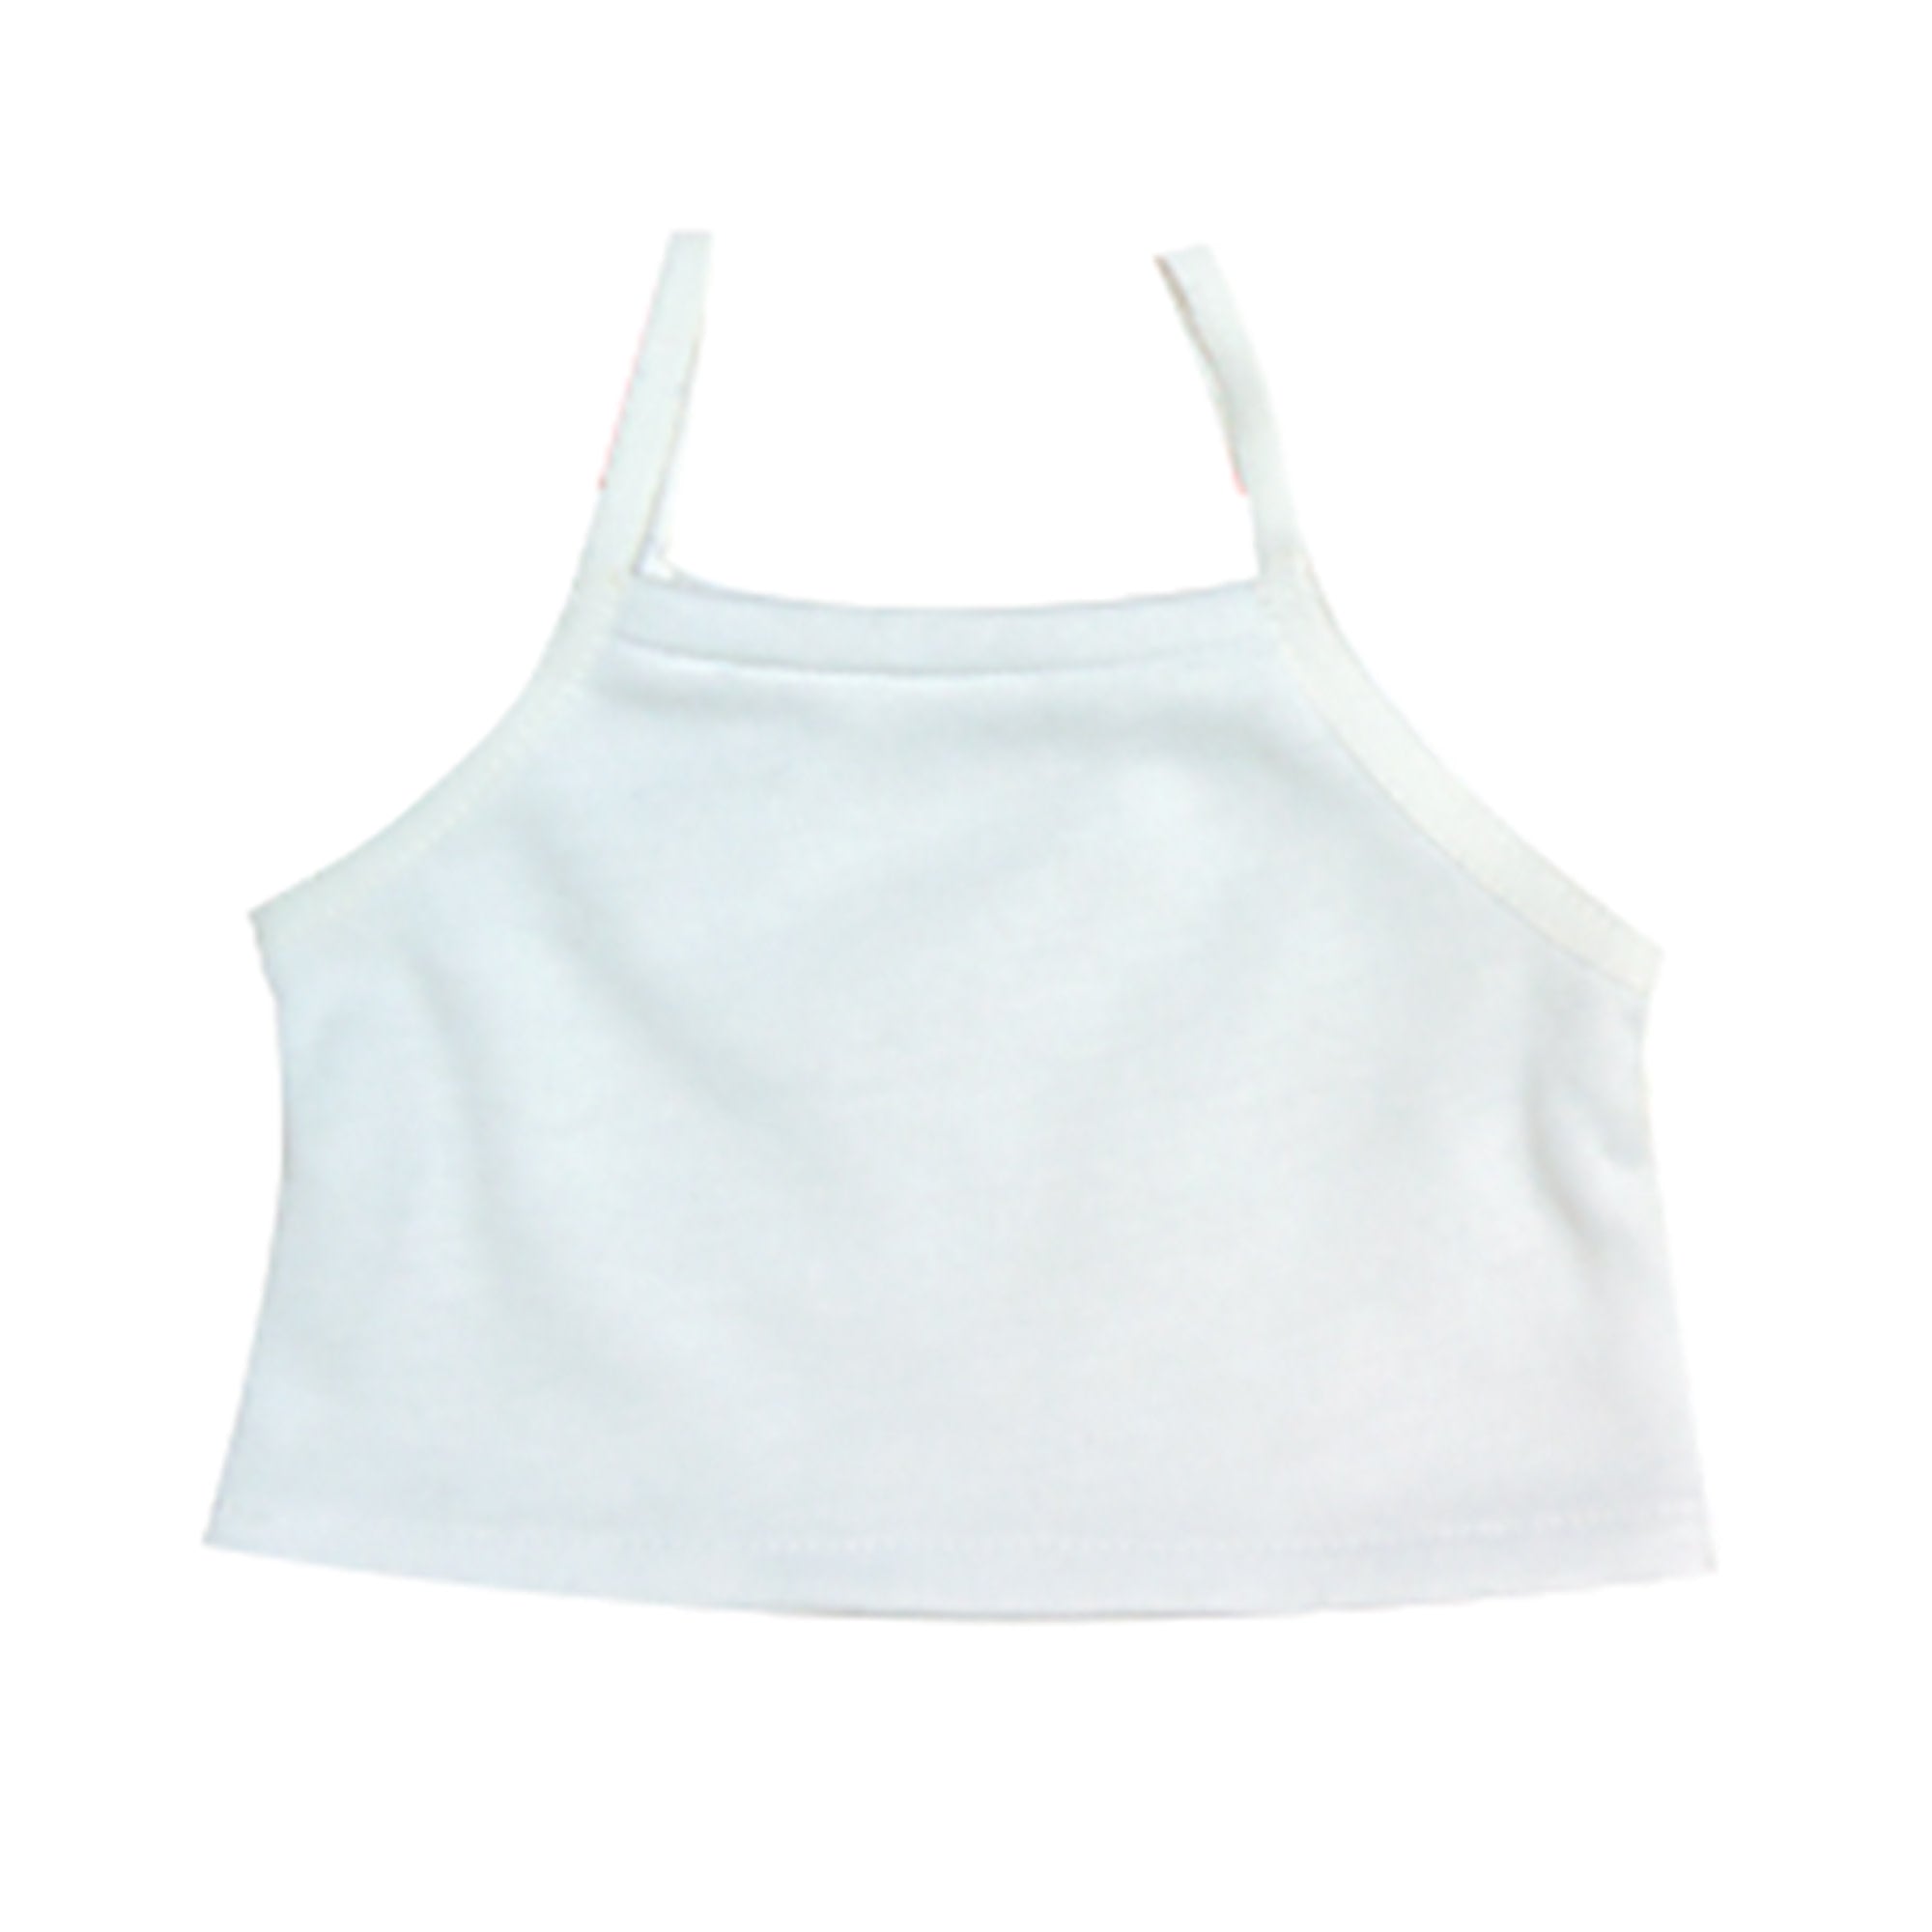 Sophia’s Basic Mix & Match Solid-Colored Plain Camisole Undershirt Spaghetti Strap Summer Tank Top for 18” Dolls, White